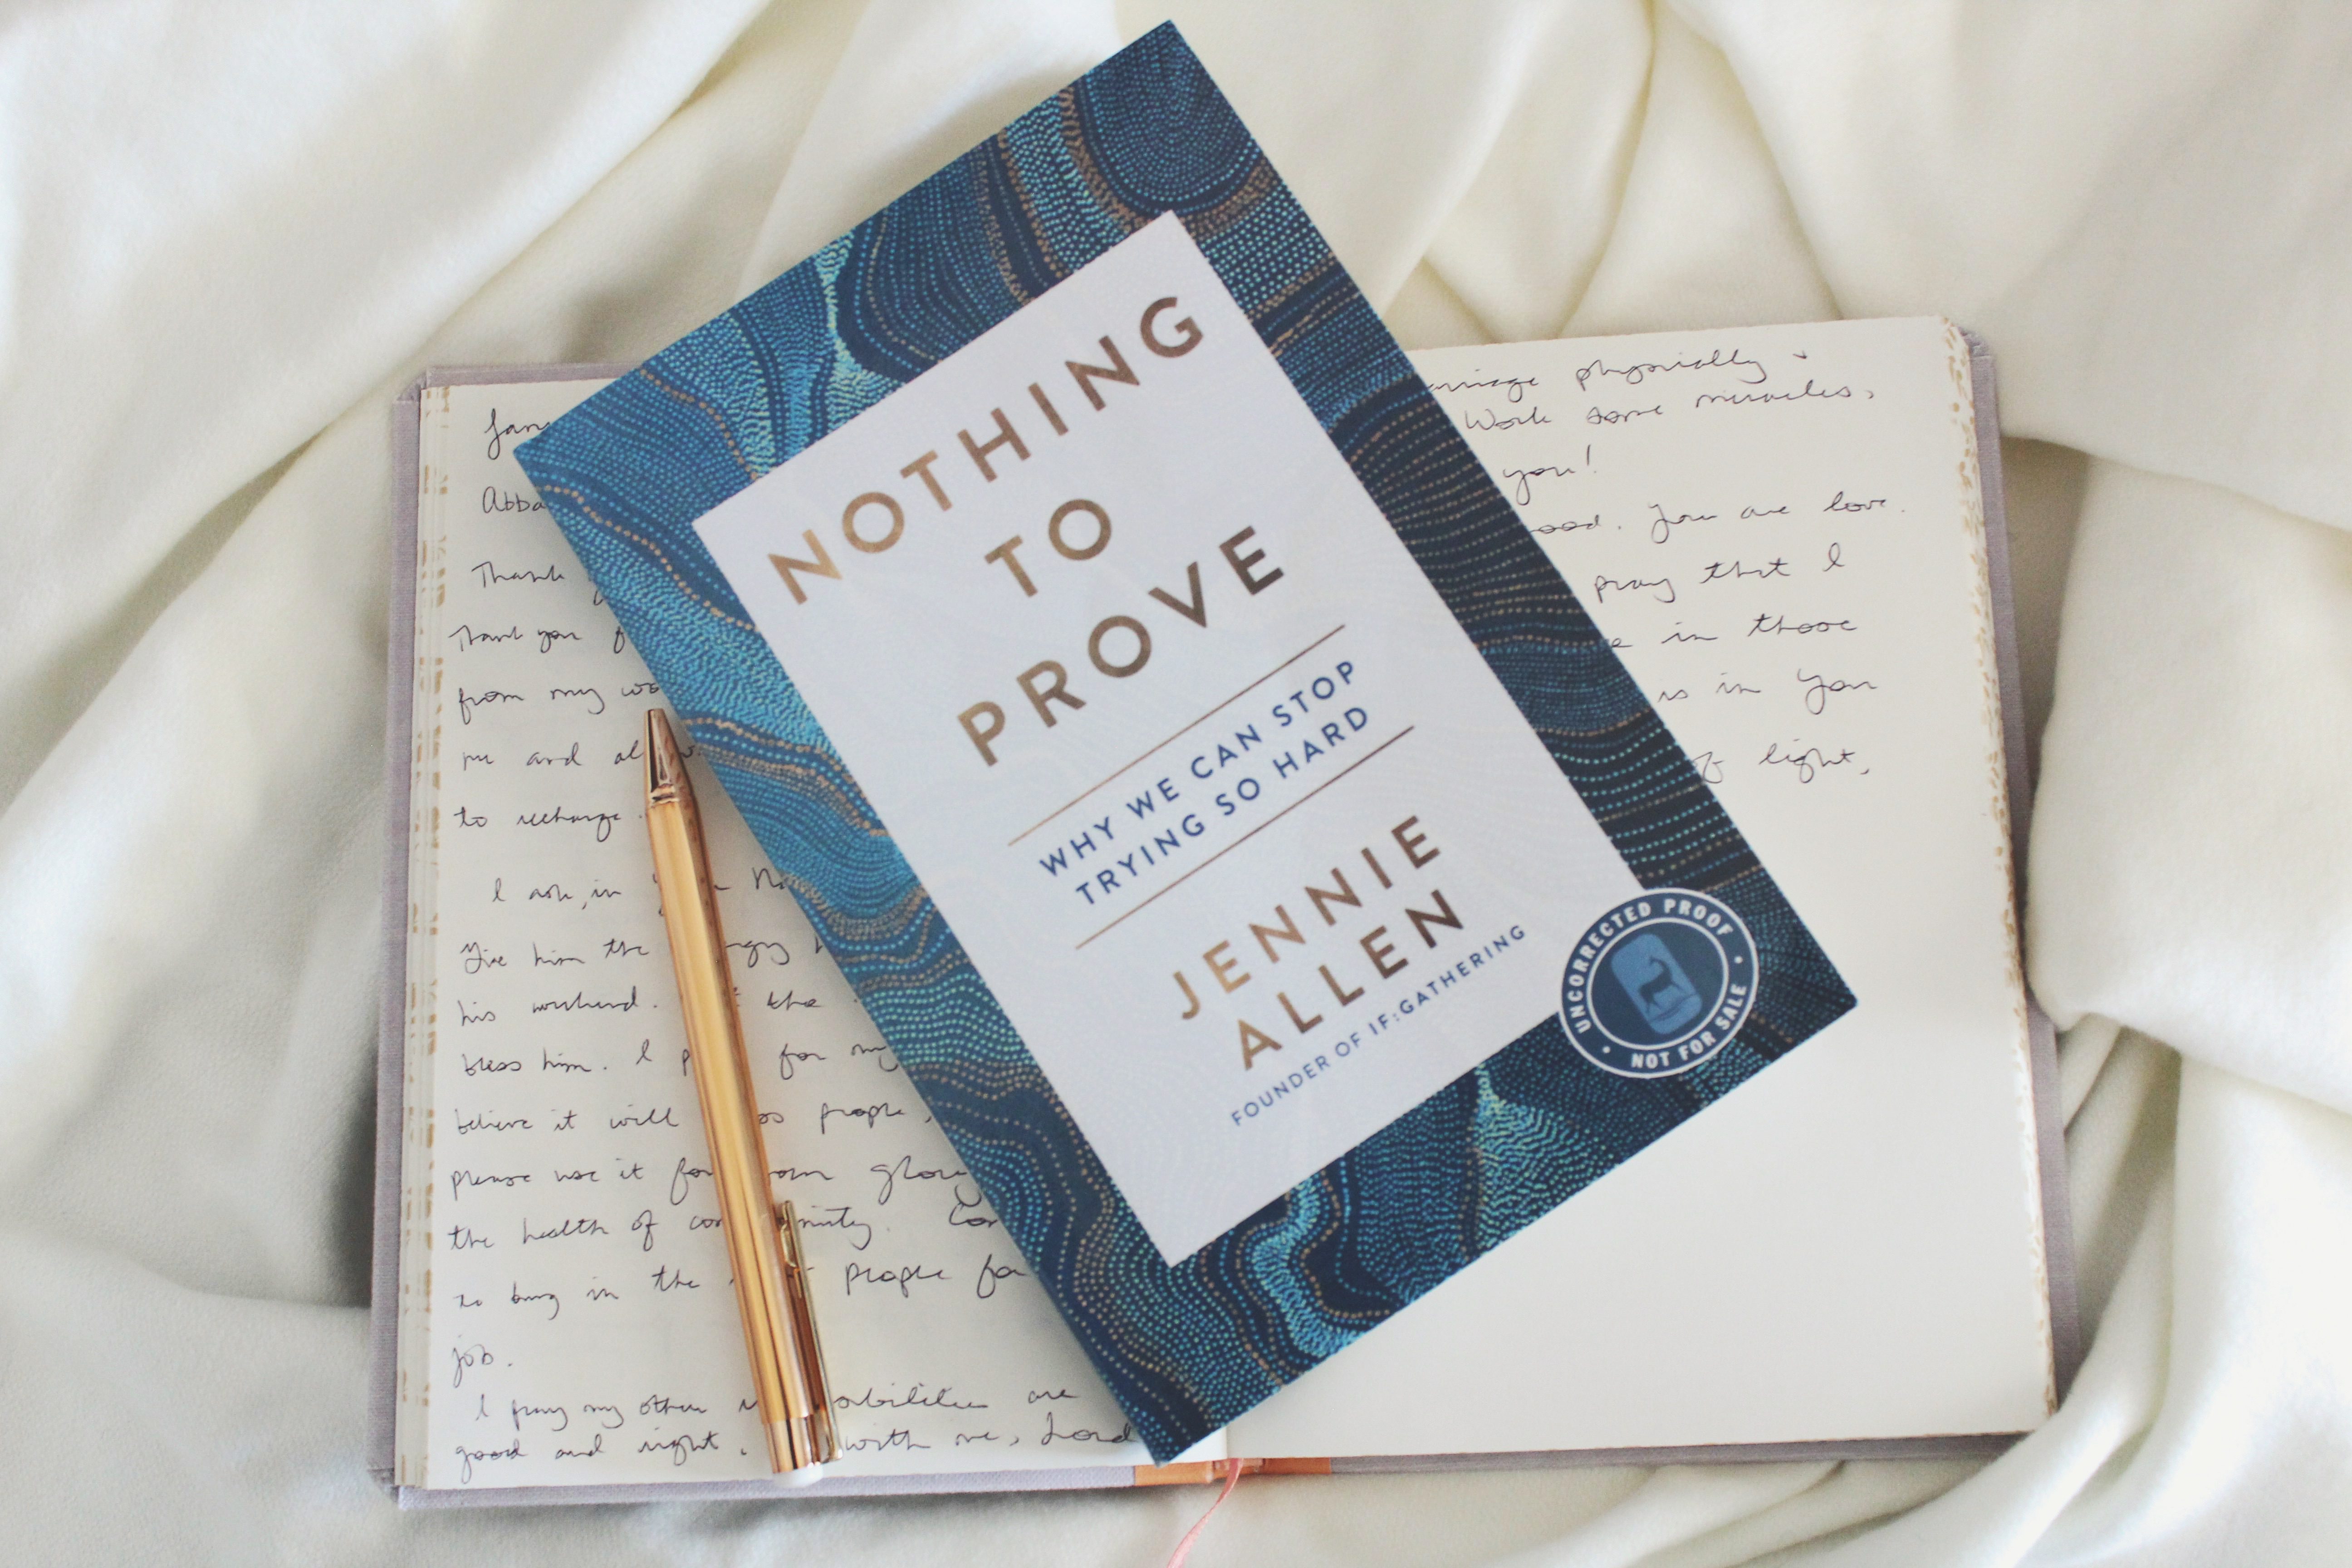 Books that Build Relationships: Nothing to Prove